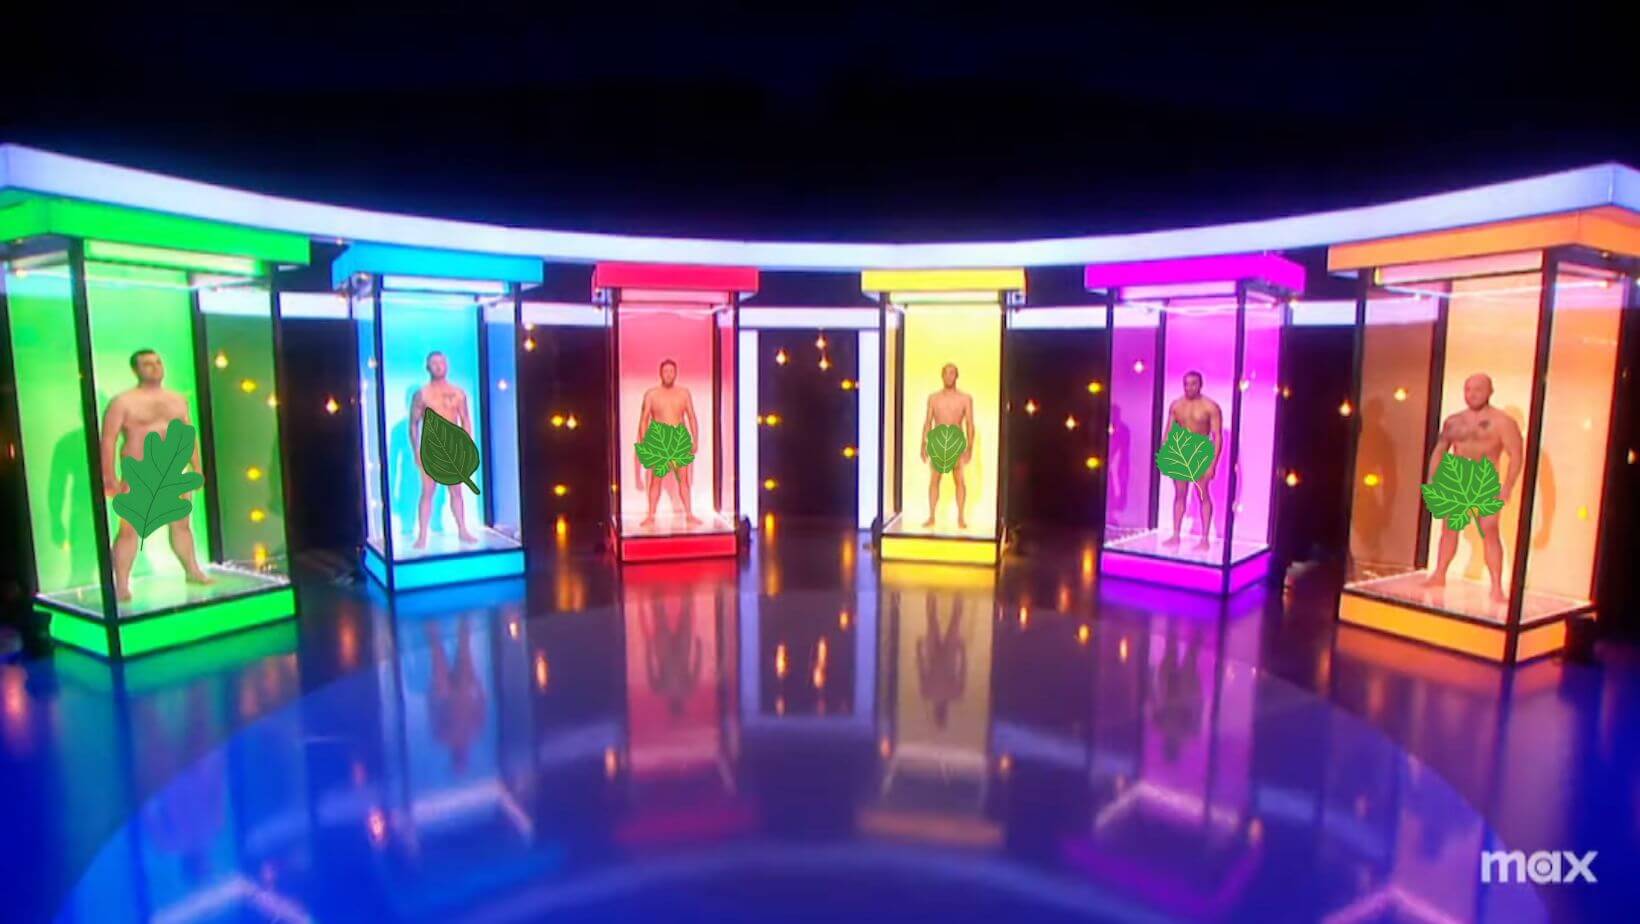 Contestants on the naked dating show are revealed slowly from the feet, up — with plenty of zooming in on the areas censored by the leaves we added.